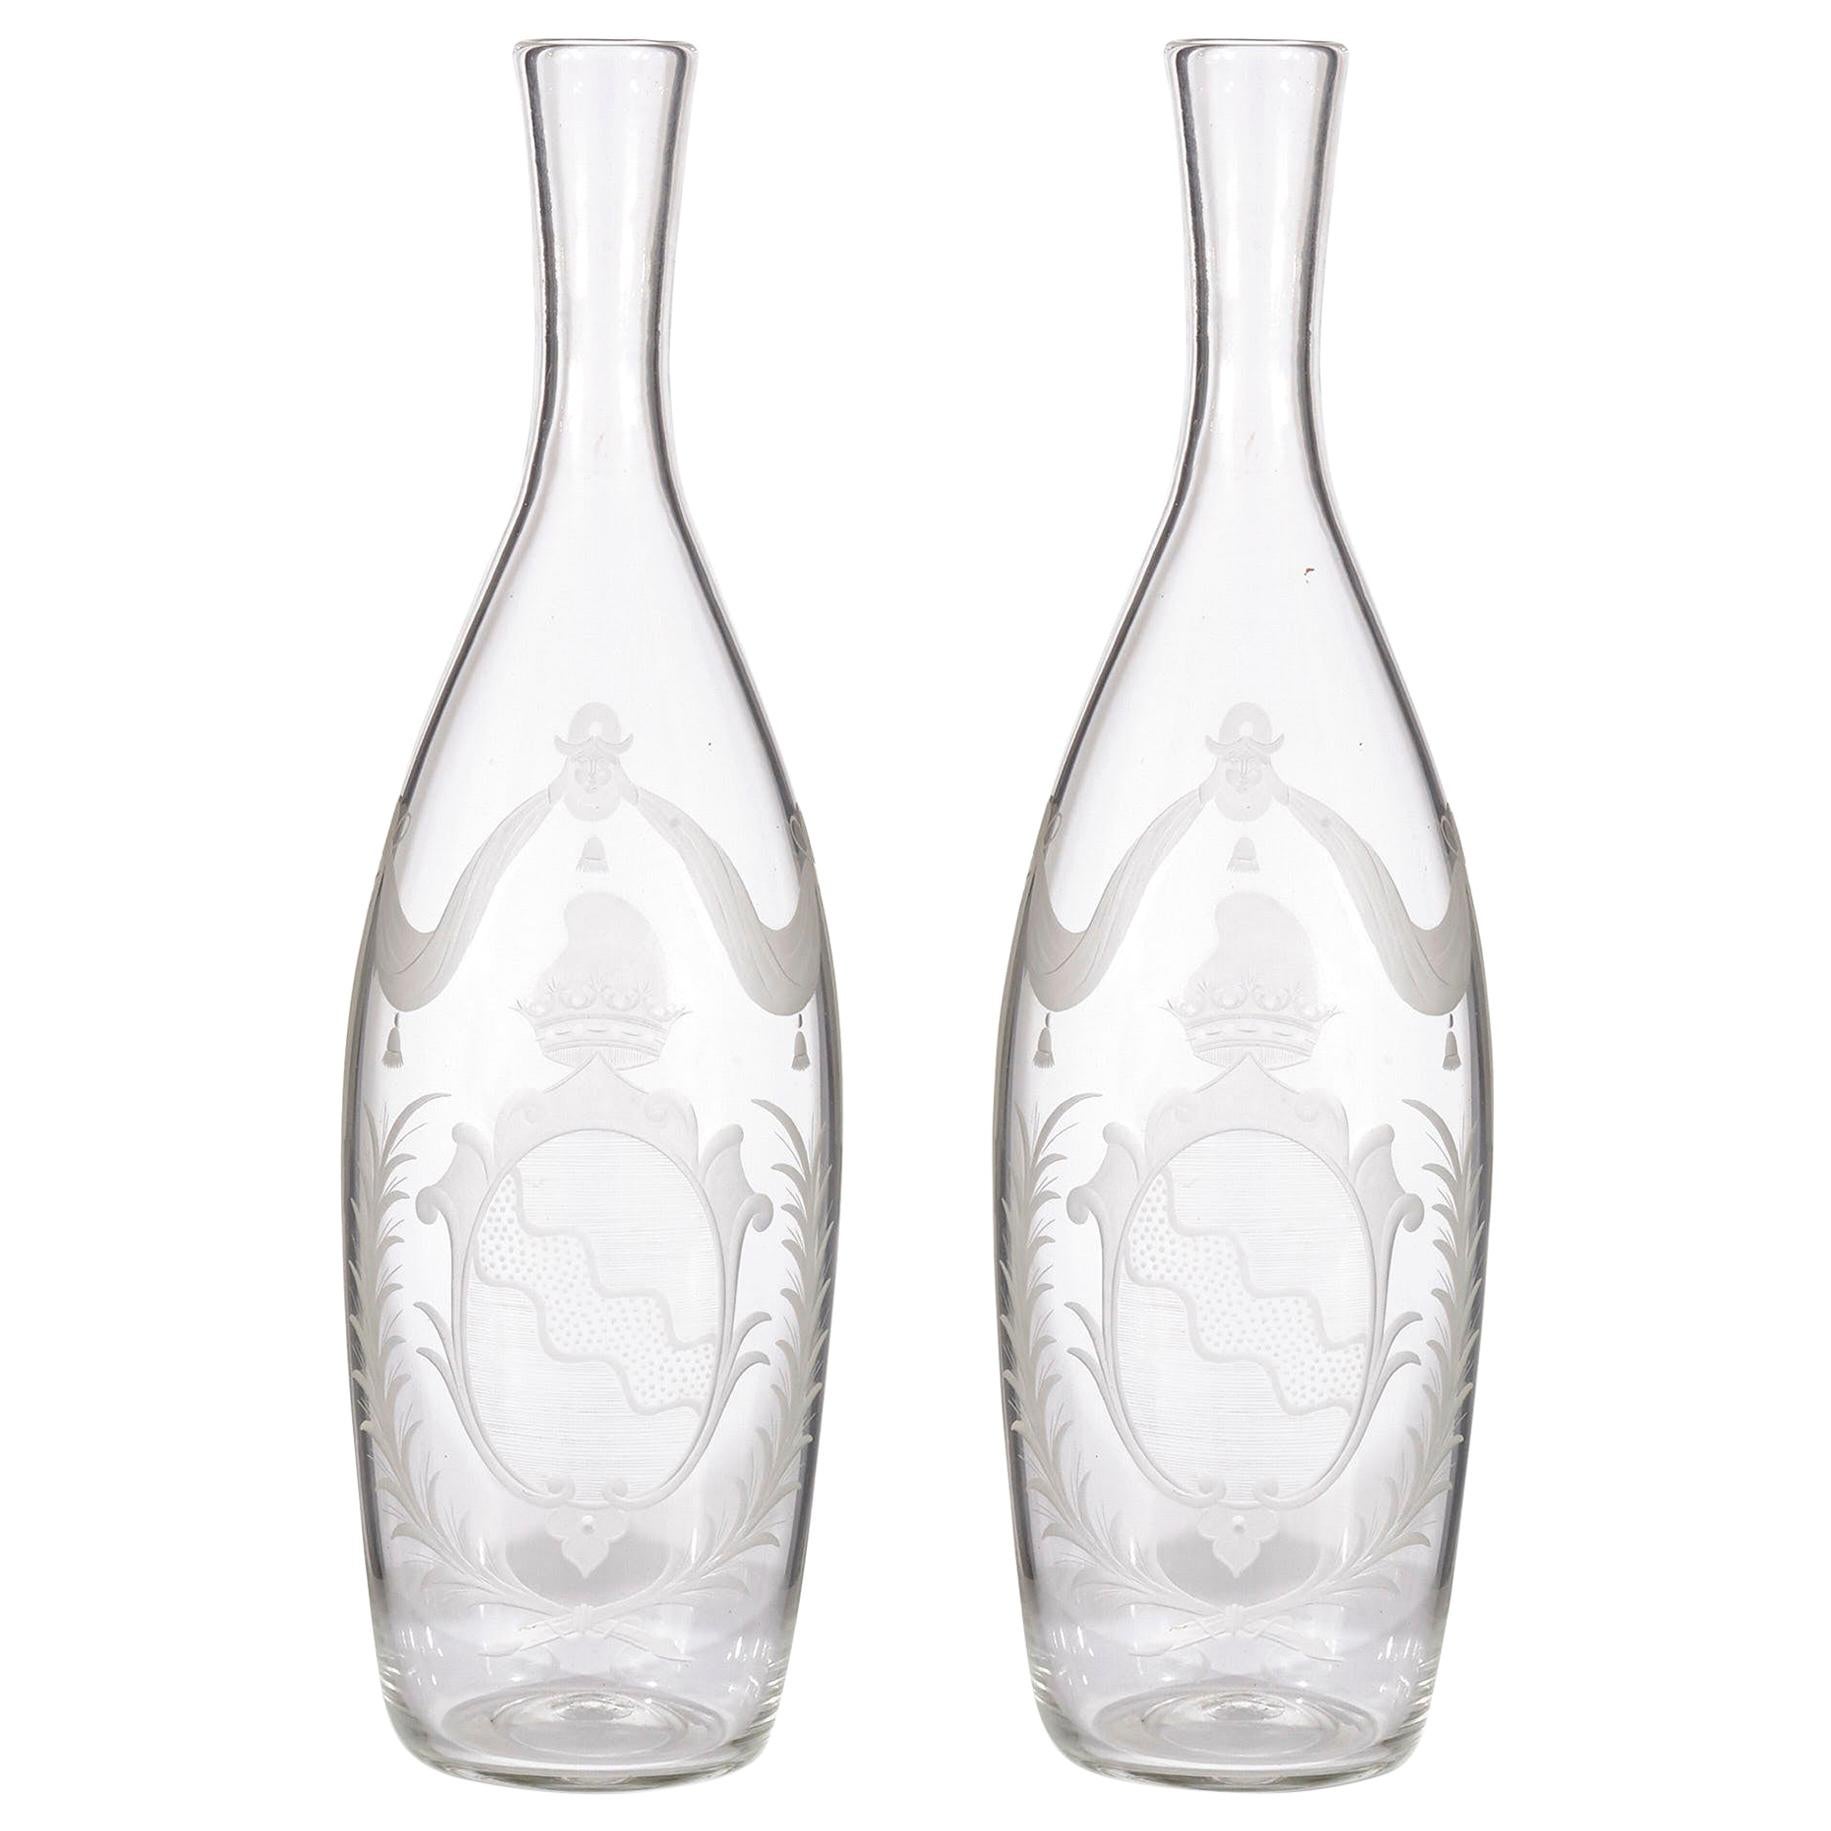 Pair of Antique Russian Glass Decanters